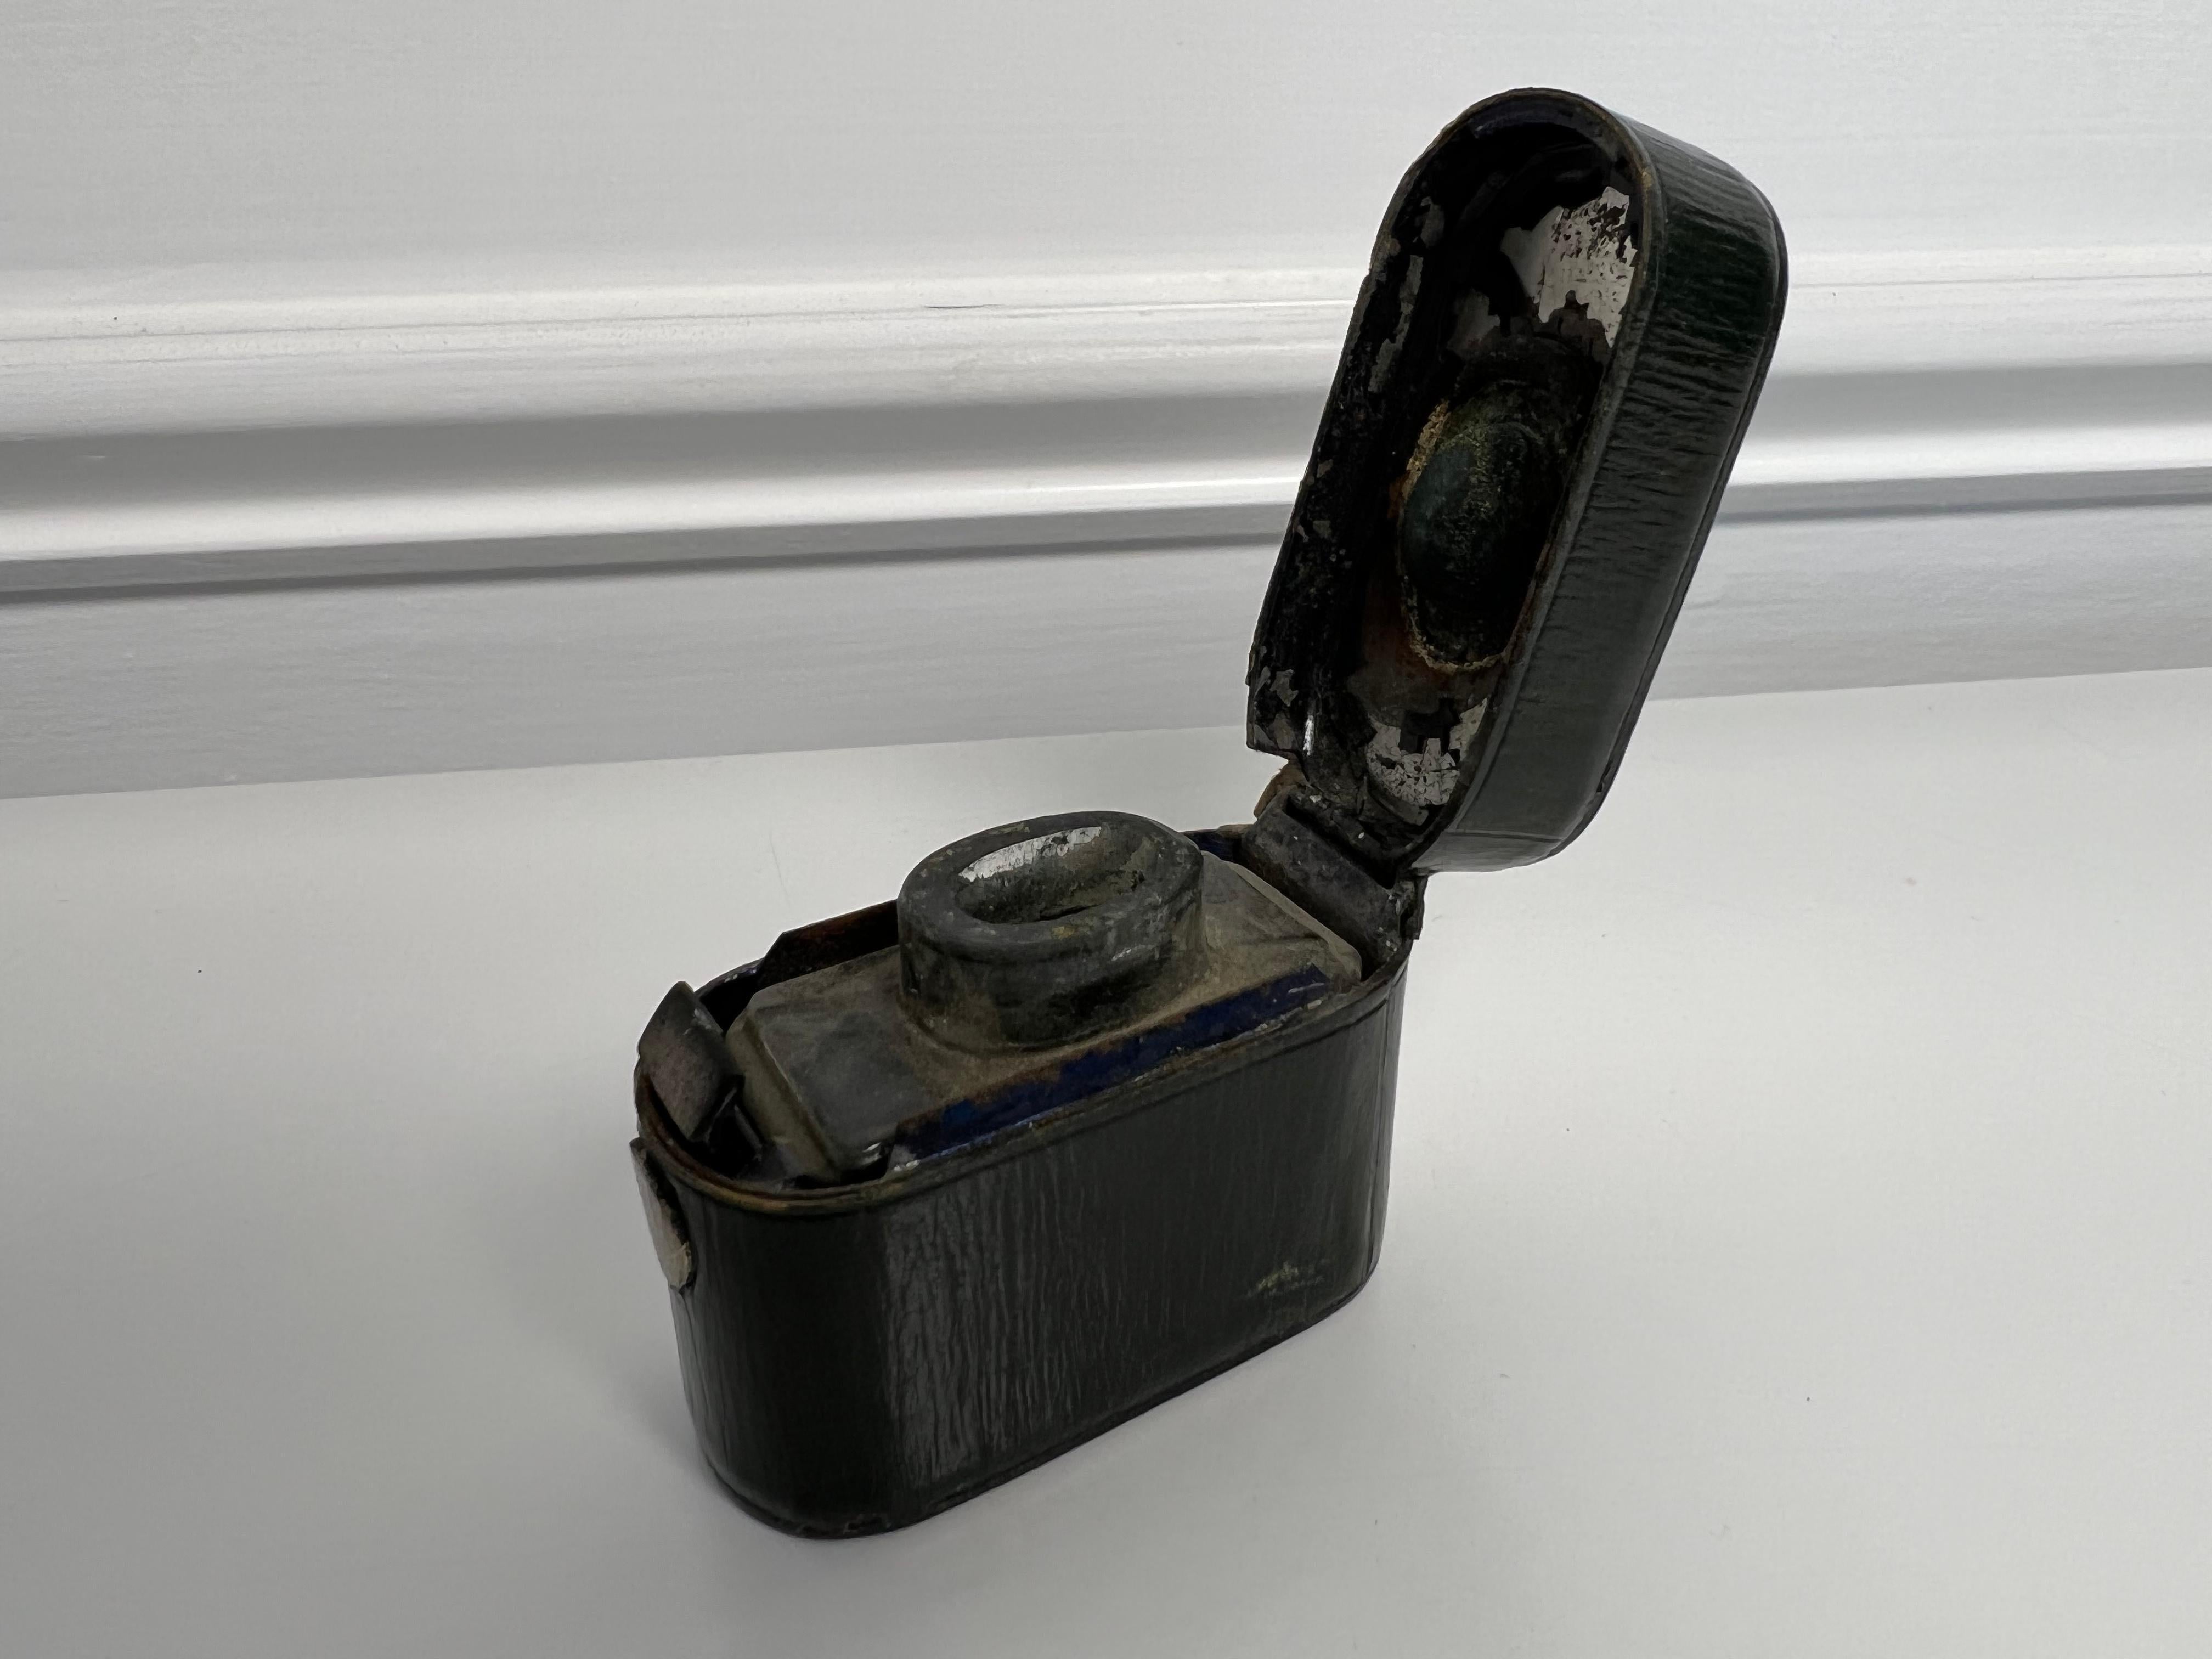 Late 19th century traveling oval leather inkwell with a glass interior well and a hinged lid. A nice pocket size inkwell, a great piece to be add to any collection. From a private collector who traveled the world buy unique and unusual pieces.